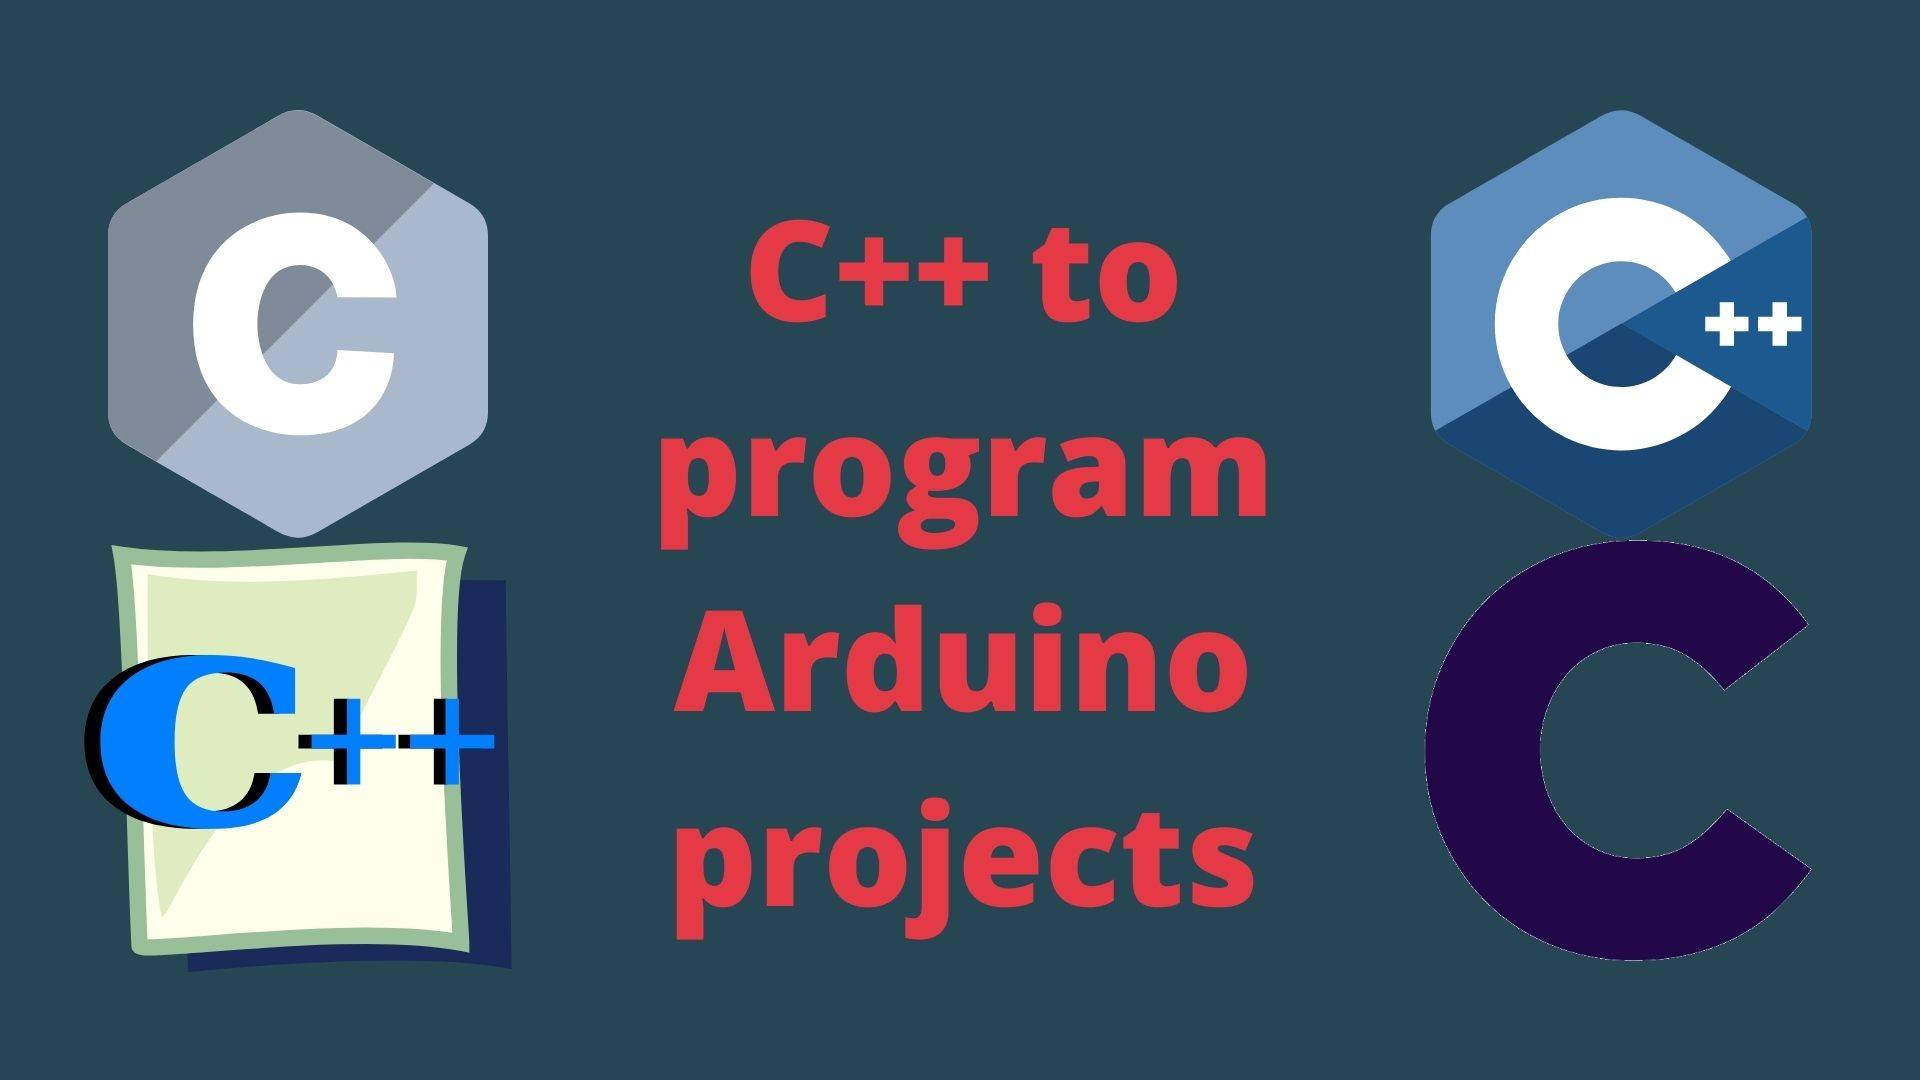 C++ is a high-level programming language that can be used to write code for the Arduino microcontroller